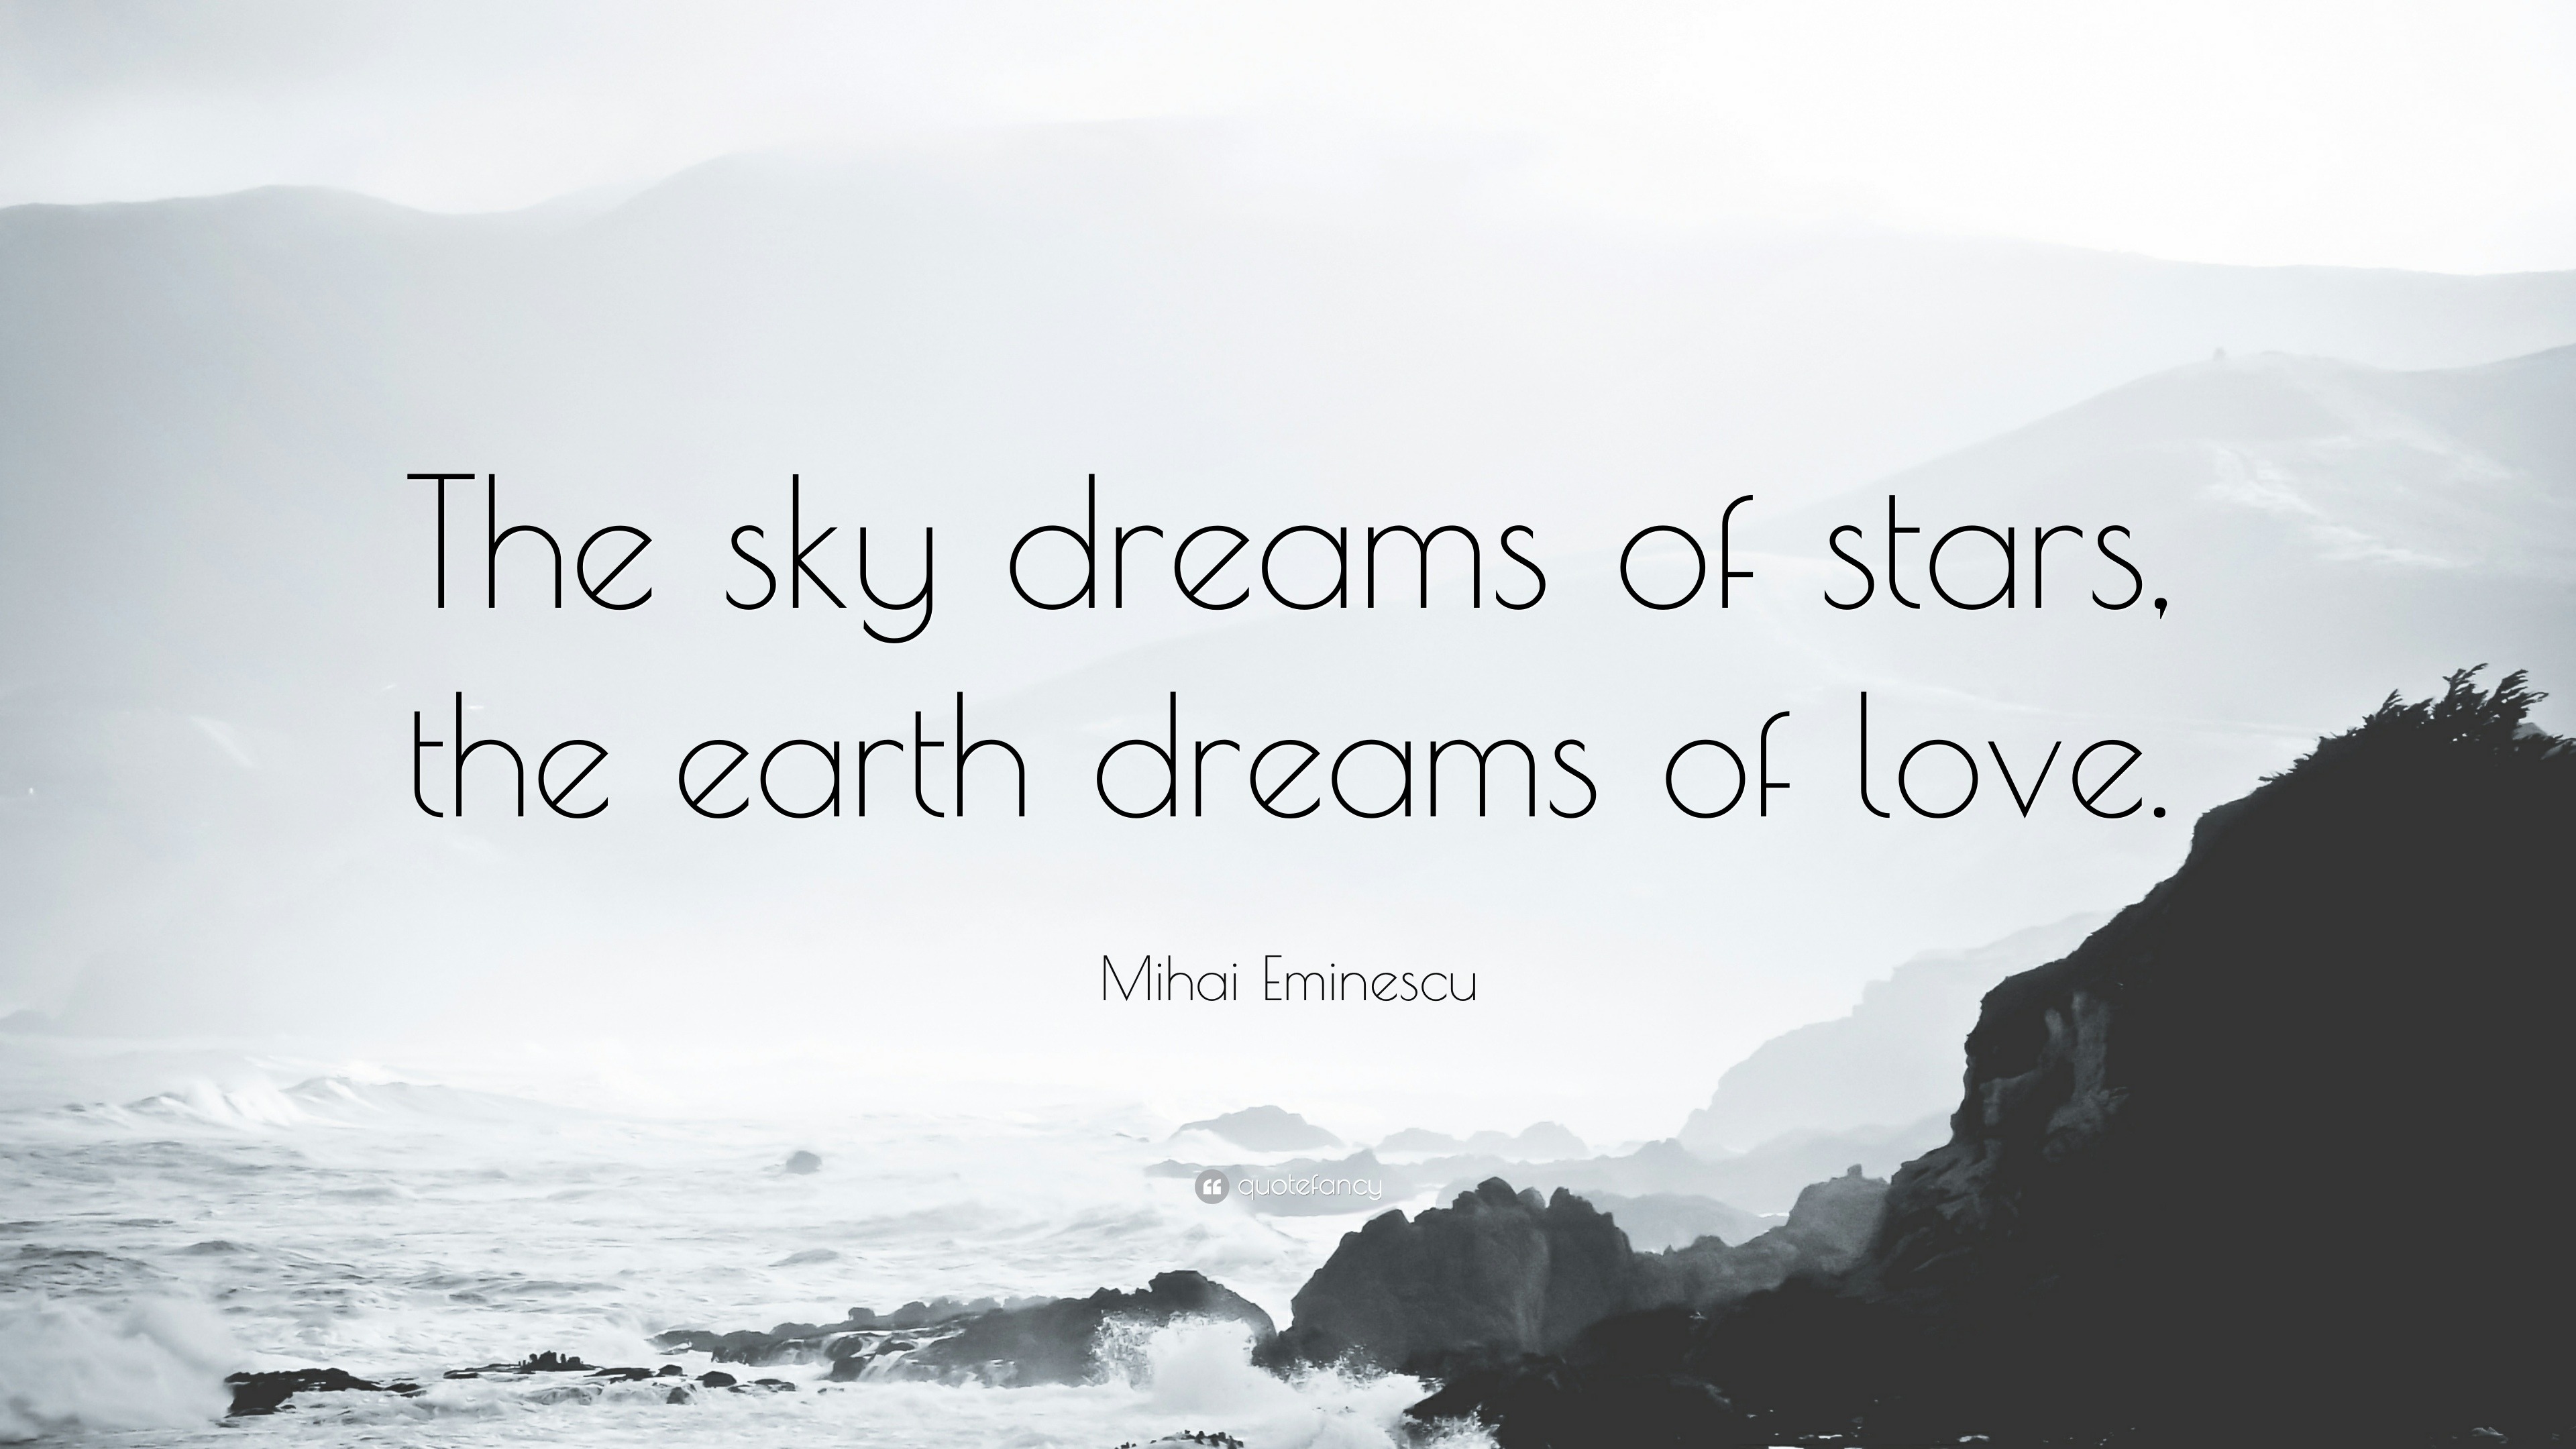 Mihai Eminescu Quote The Sky Dreams Of Stars The Earth Dreams Of Love 9 Wallpapers Quotefancy